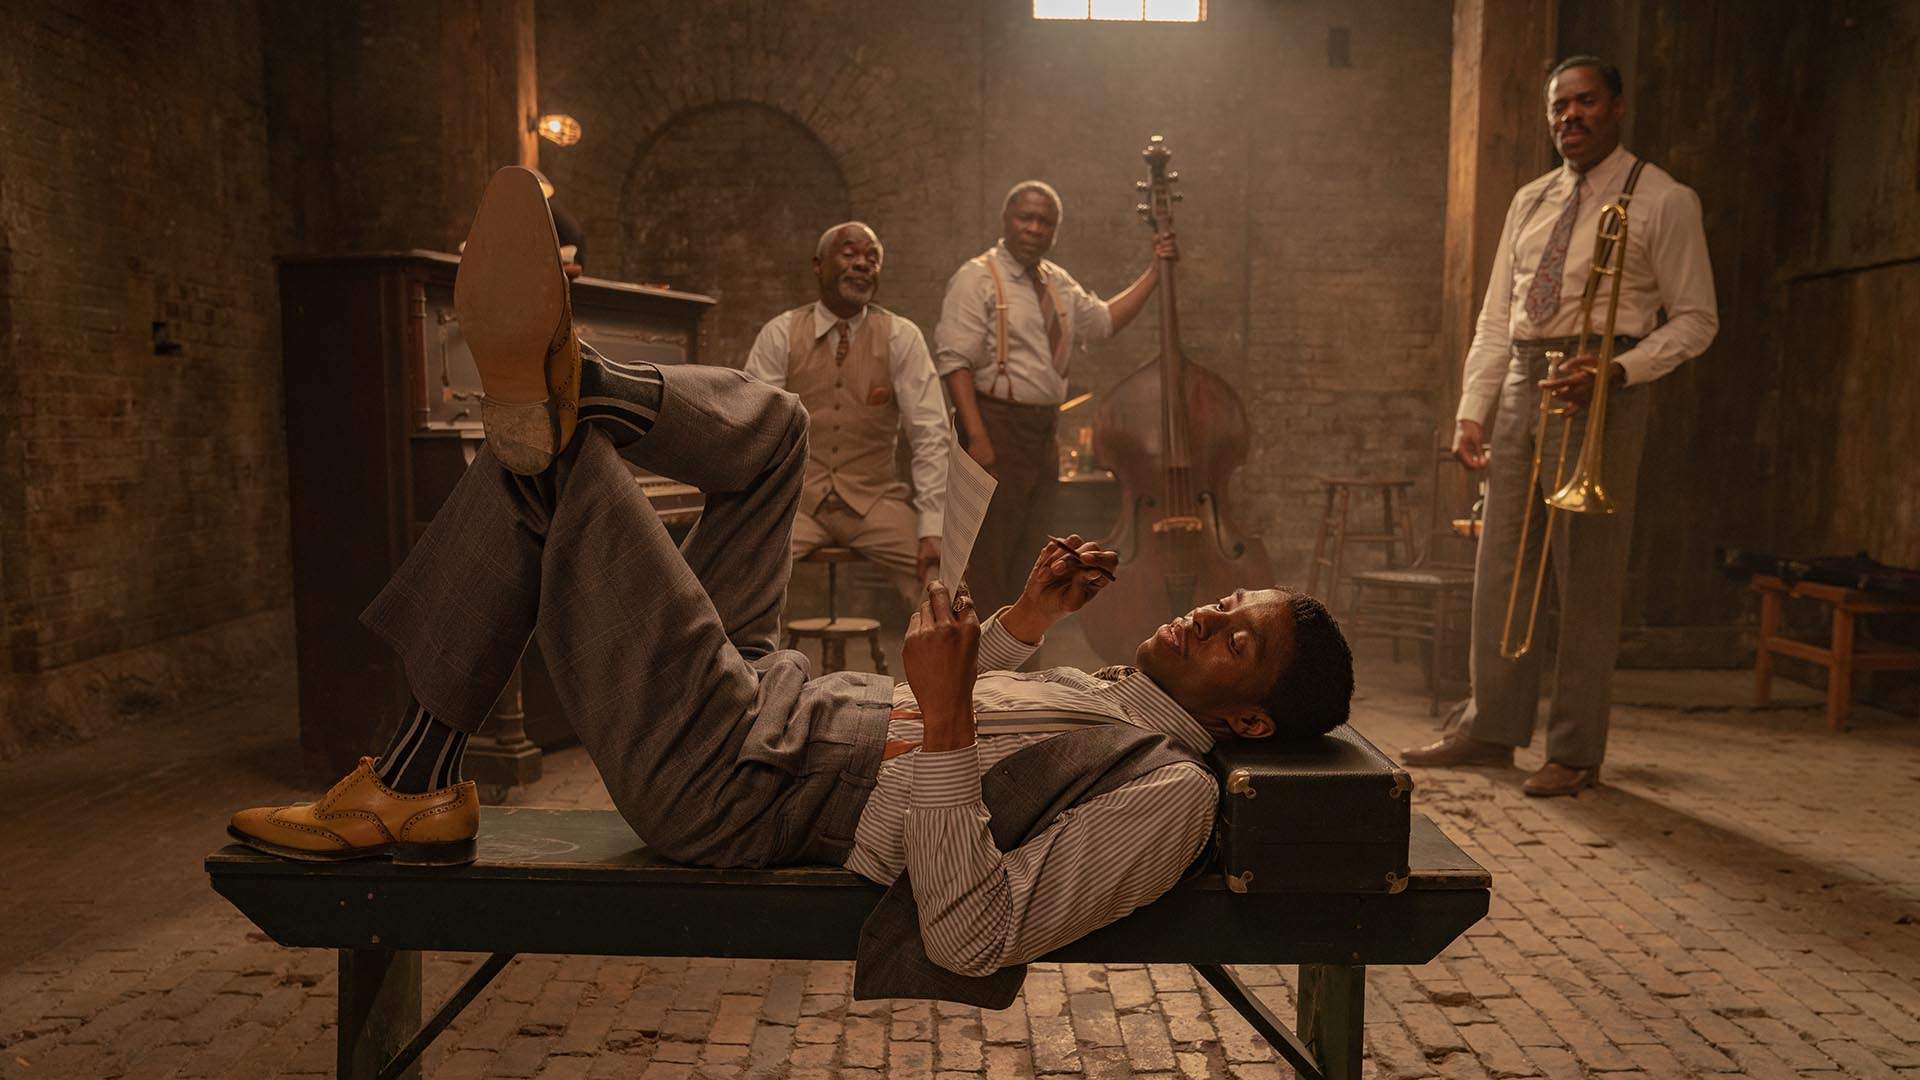 Chadwick Boseman Plays the Blues in the Trailer for His Final Film 'Ma Rainey's Black Bottom'